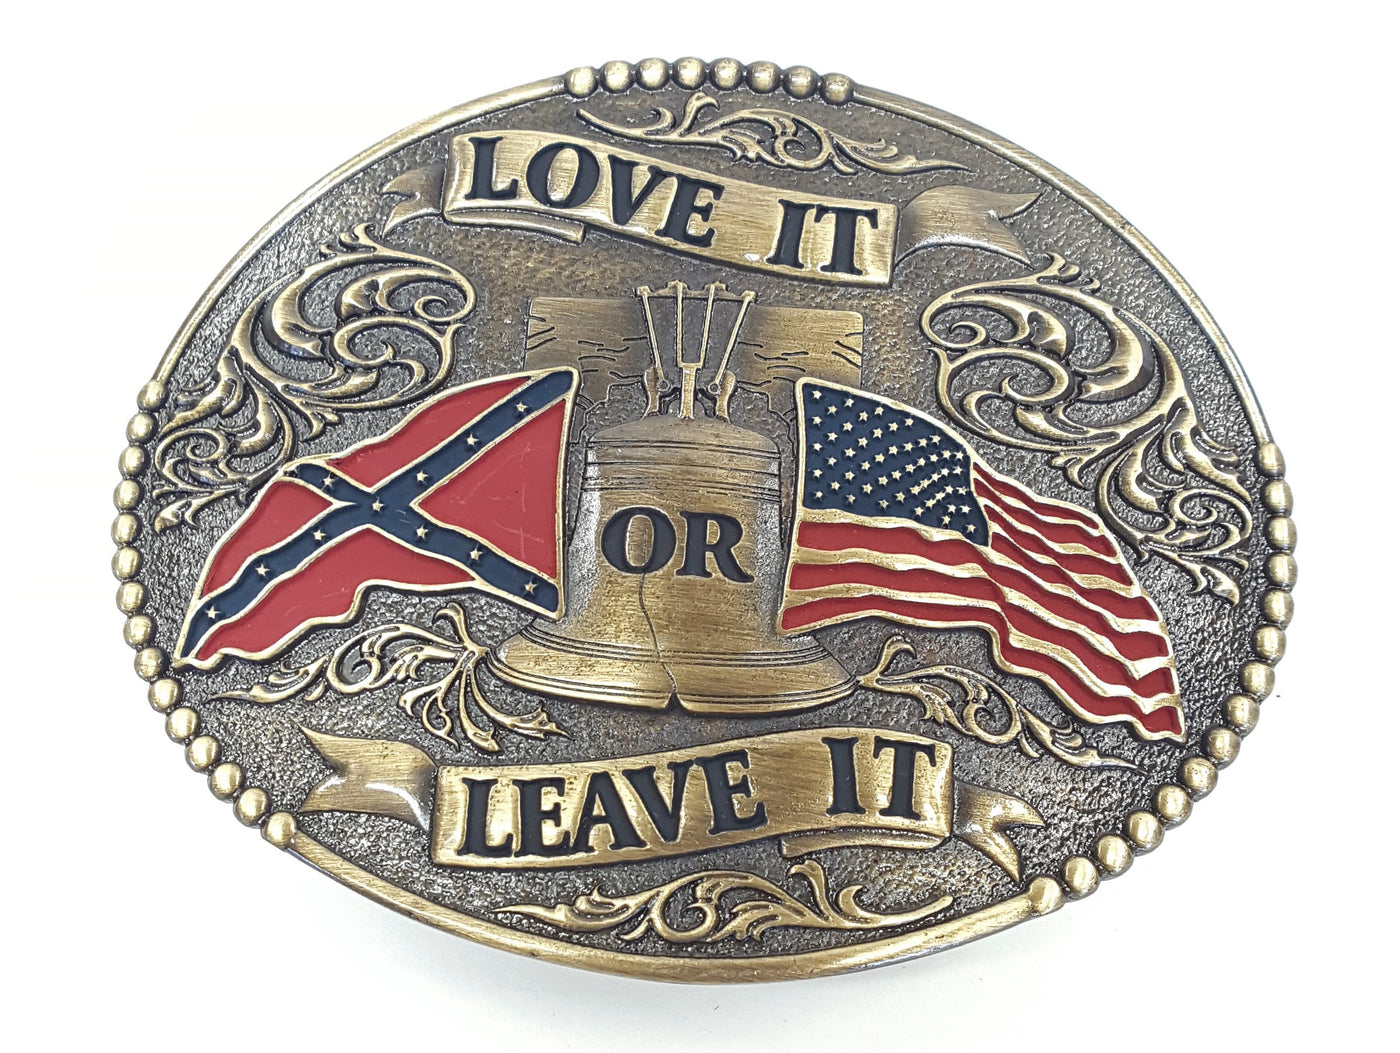 Antique Brass Belt Buckle with Love It or Leave It design Made in Mexico Fits Belts up to 1 3/4" wide Dimensions 3" x 4" Available online and in our retail shop in Smyrna, TN, just outside of Nashville